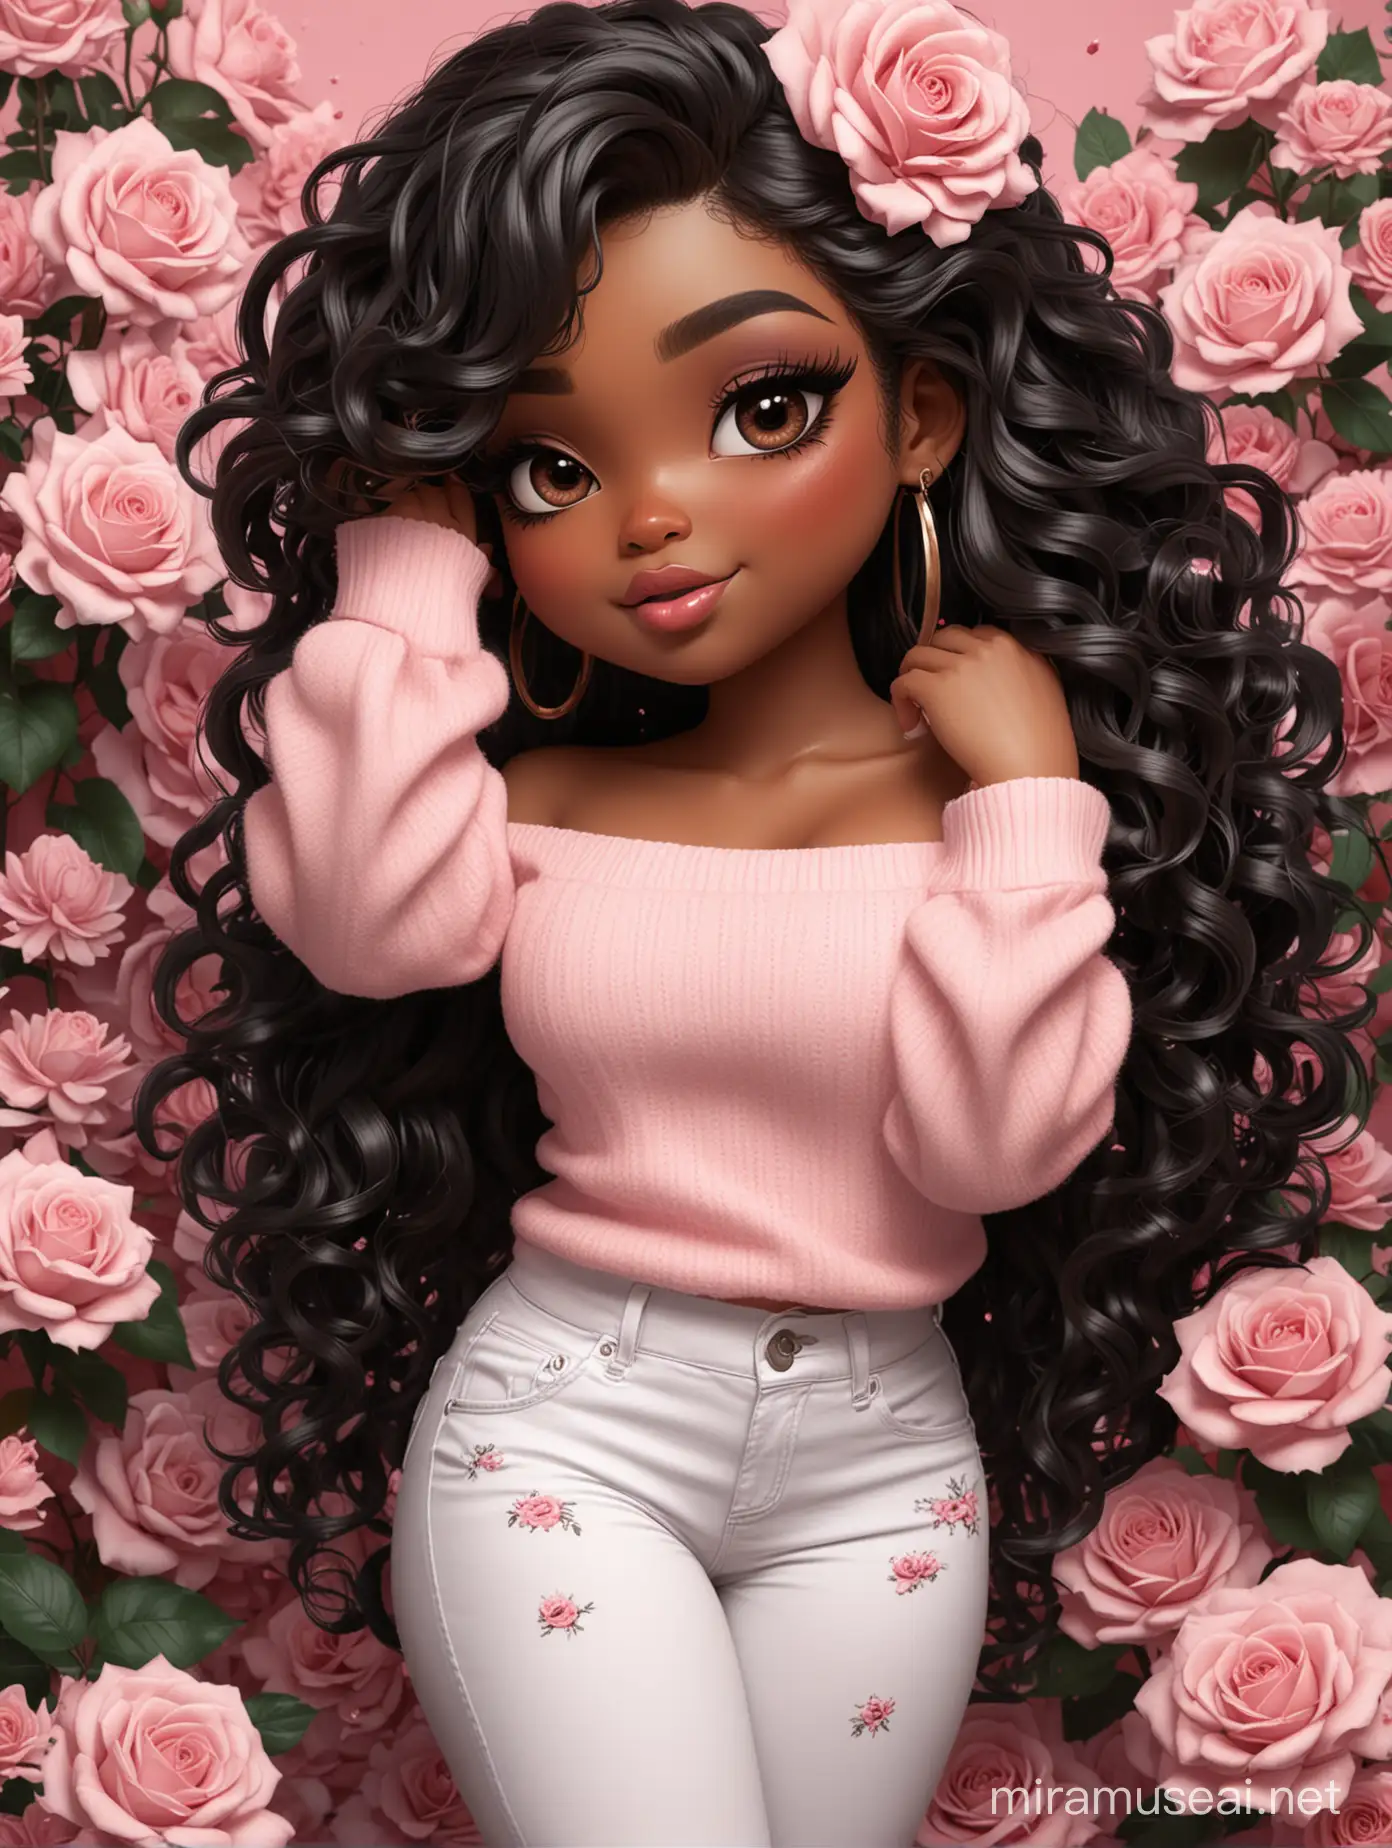 Create an expressionism art image of a chibi thick curvy black female wearing tight white jeans and rose pink off the shoulder sweater.. Prominent make up with brown eyes. Highly detailed wild long curly black hair flowing in her face. Background of rose pink and black flowers all around.